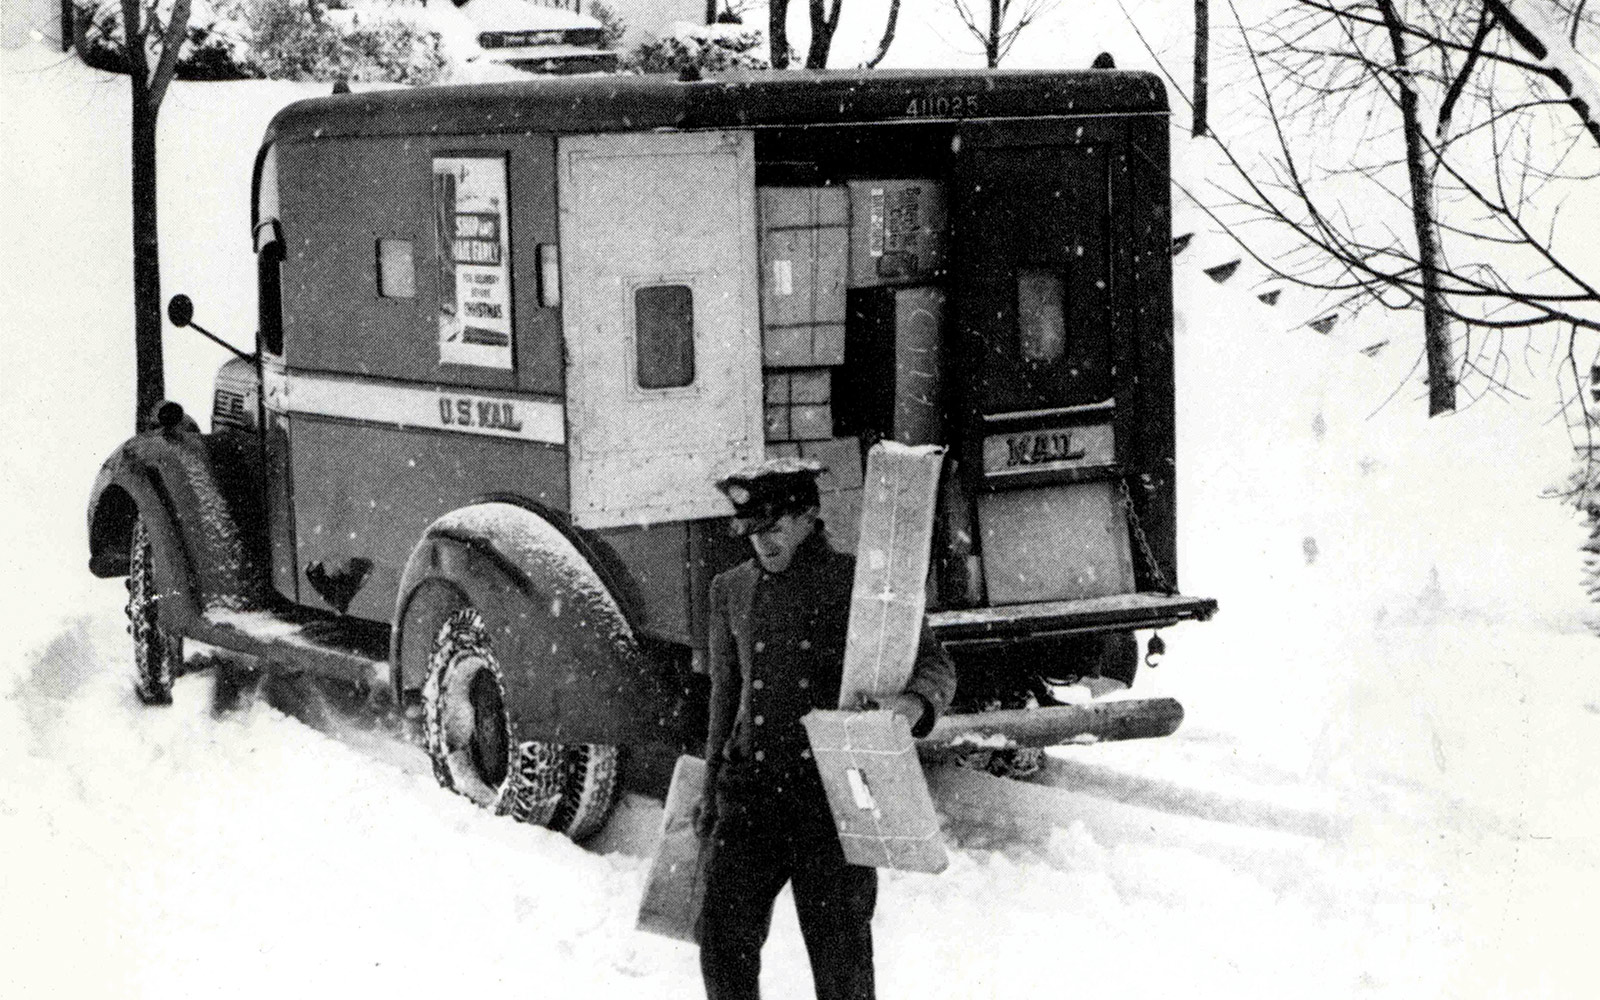 Come rain or shine or absurd amounts of snow, members of the postal service (like this postman from 1950) have done their best to make sure holiday packages reach their destinations.